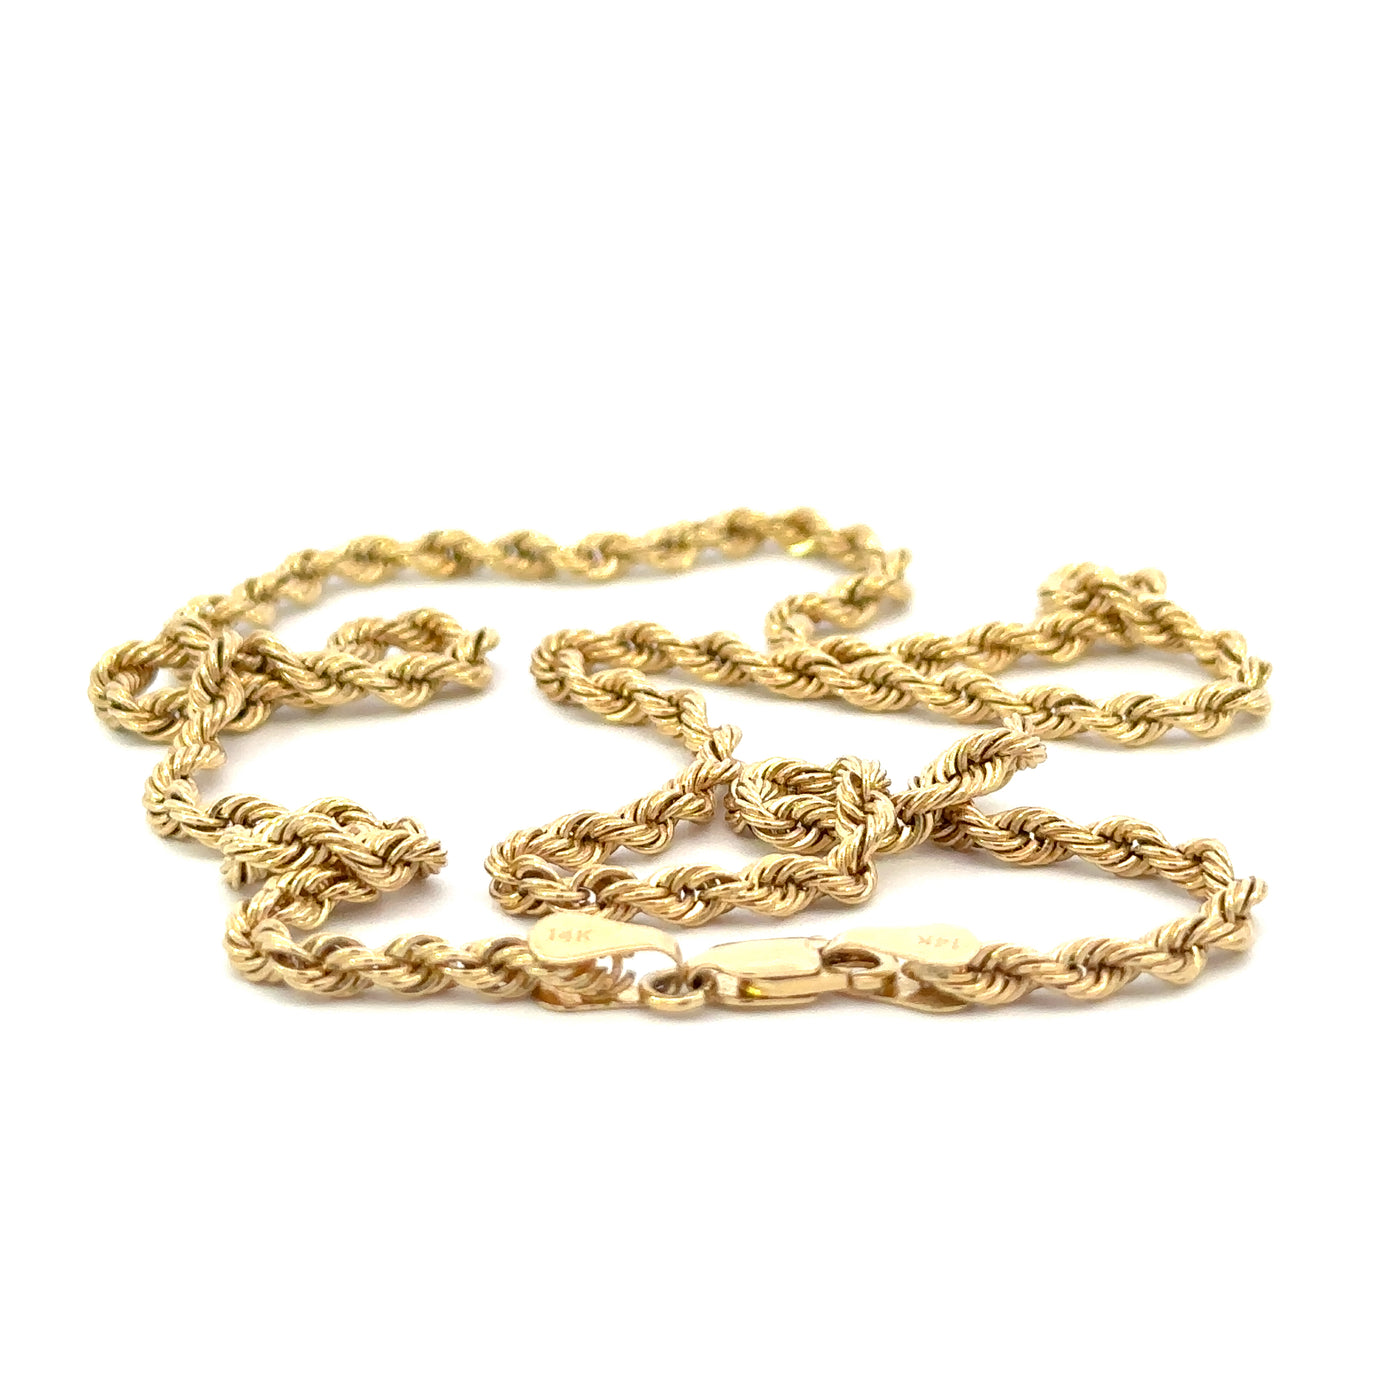 Vintage Gold Chains